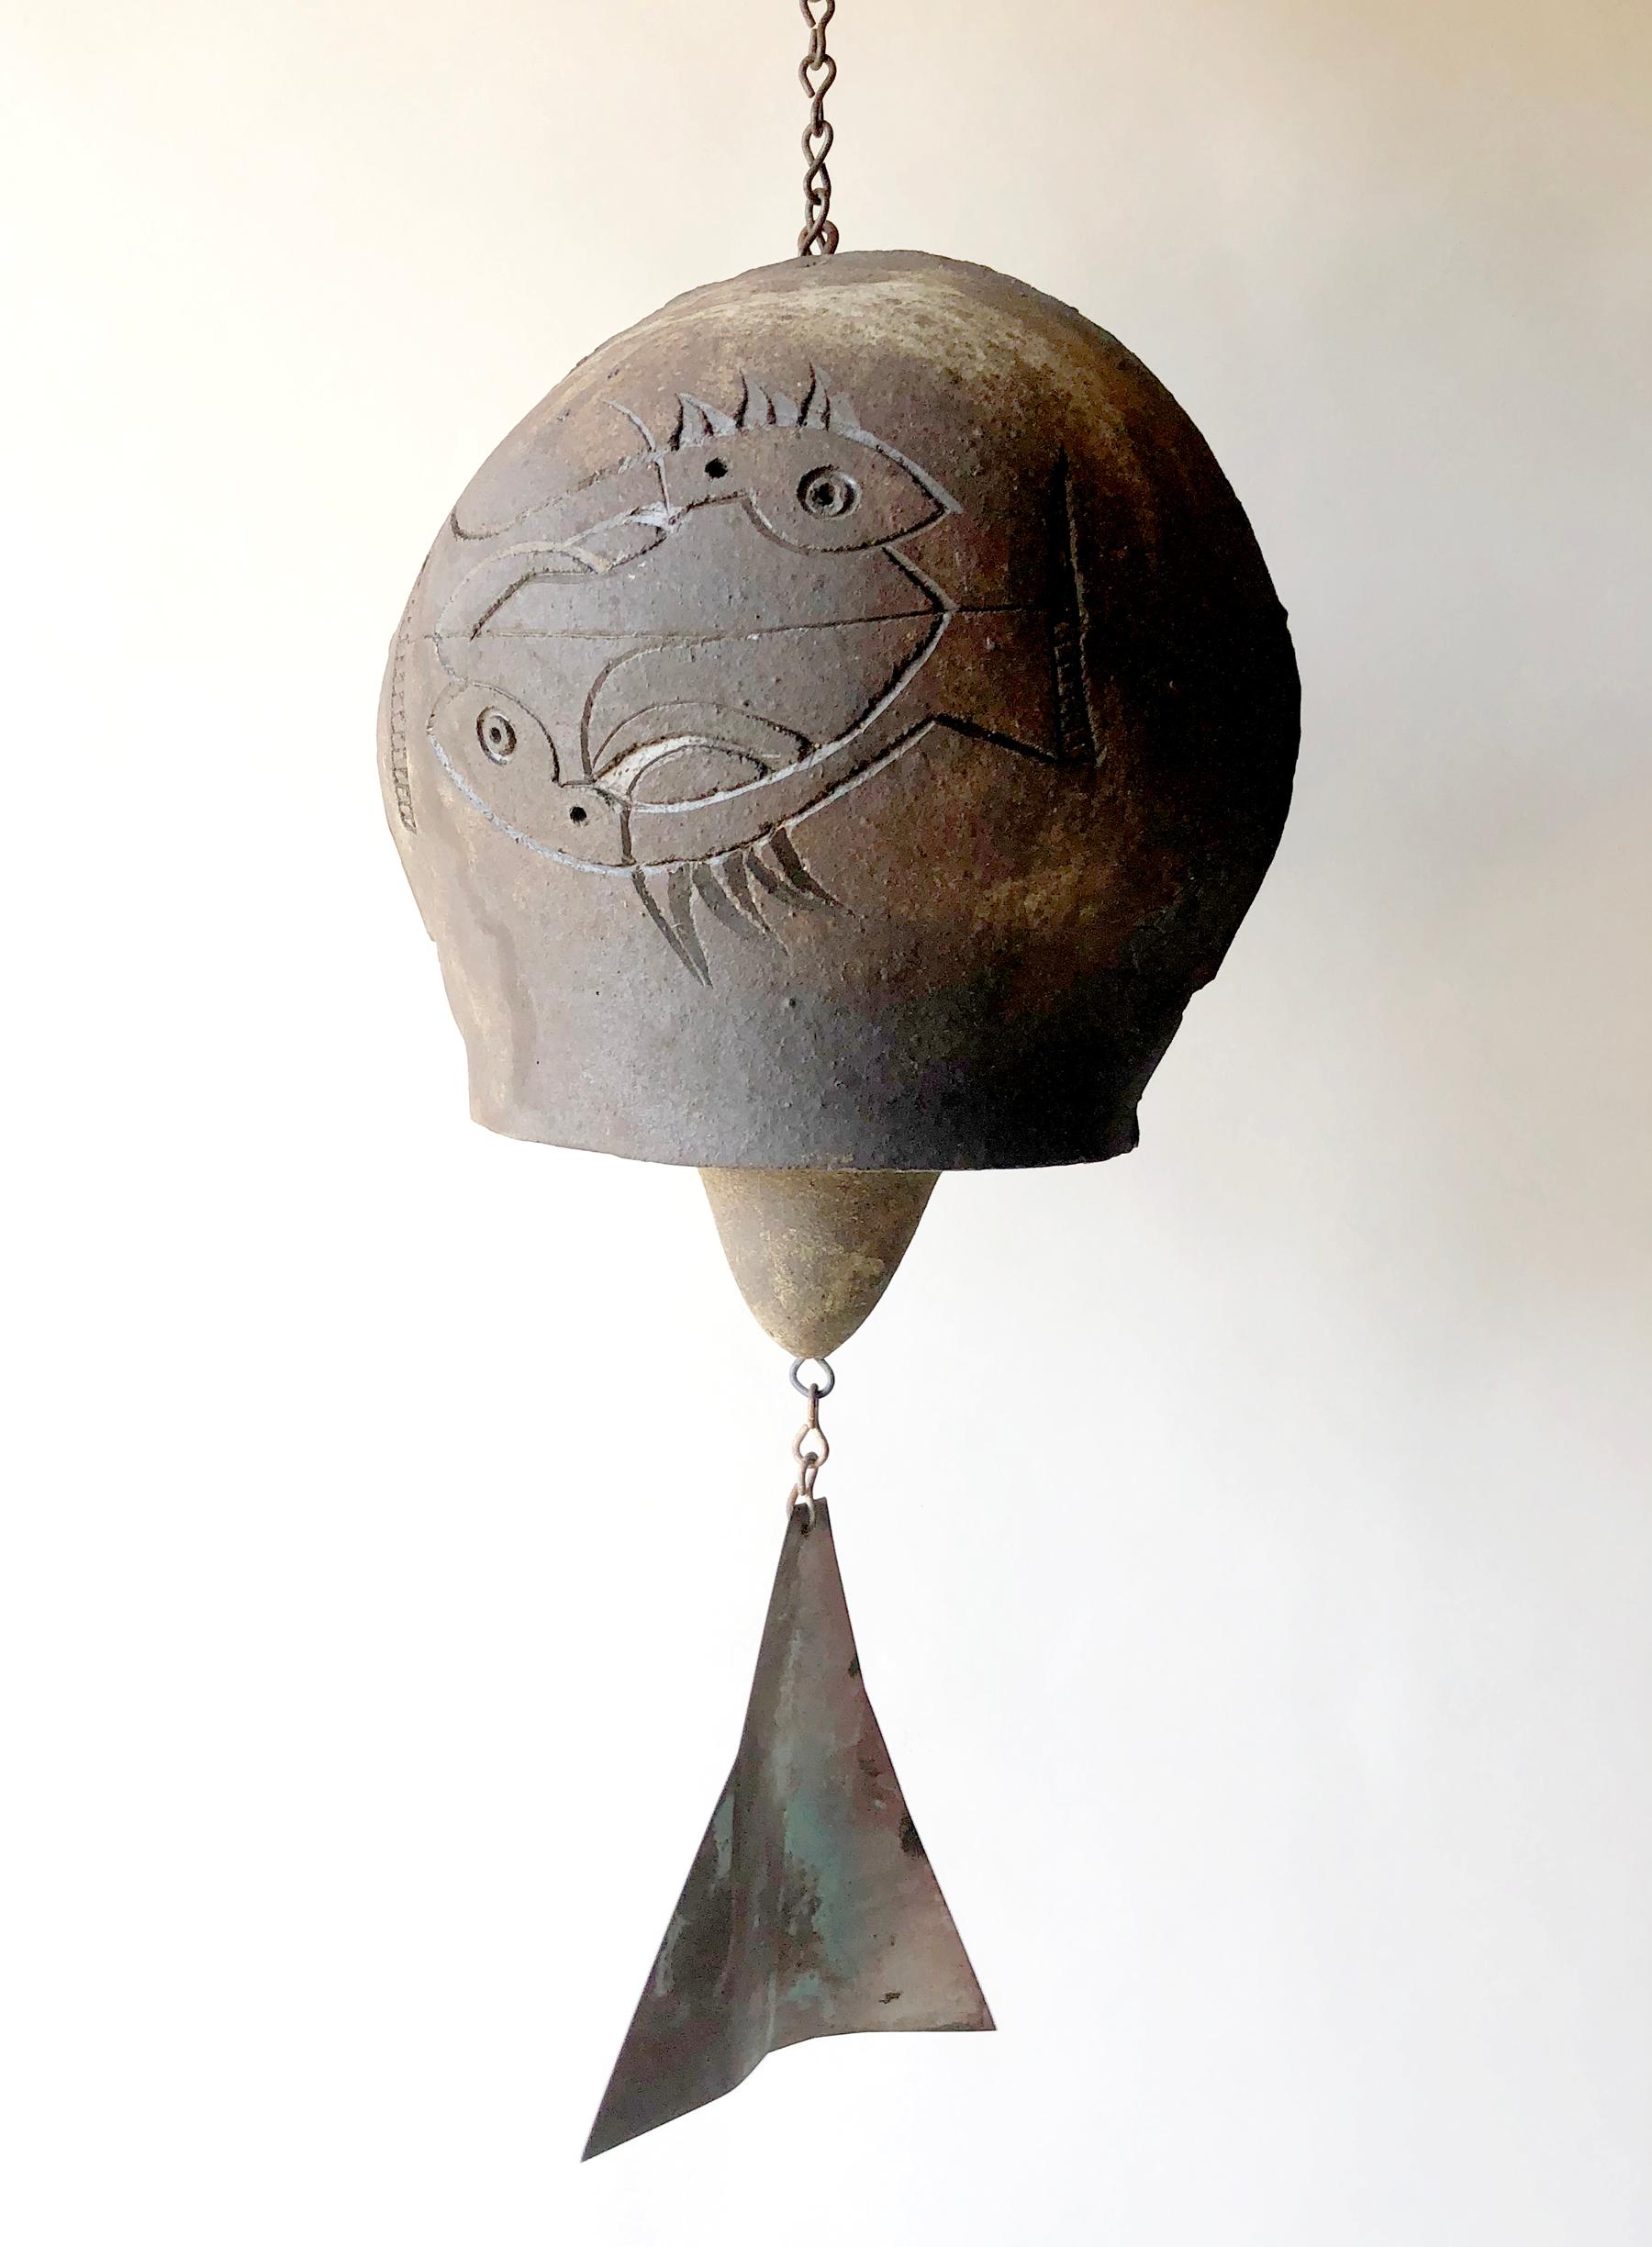 Ceramic wind chime bell with abstract decoration by Paolo Soleri of Arizona. Bell measures 9